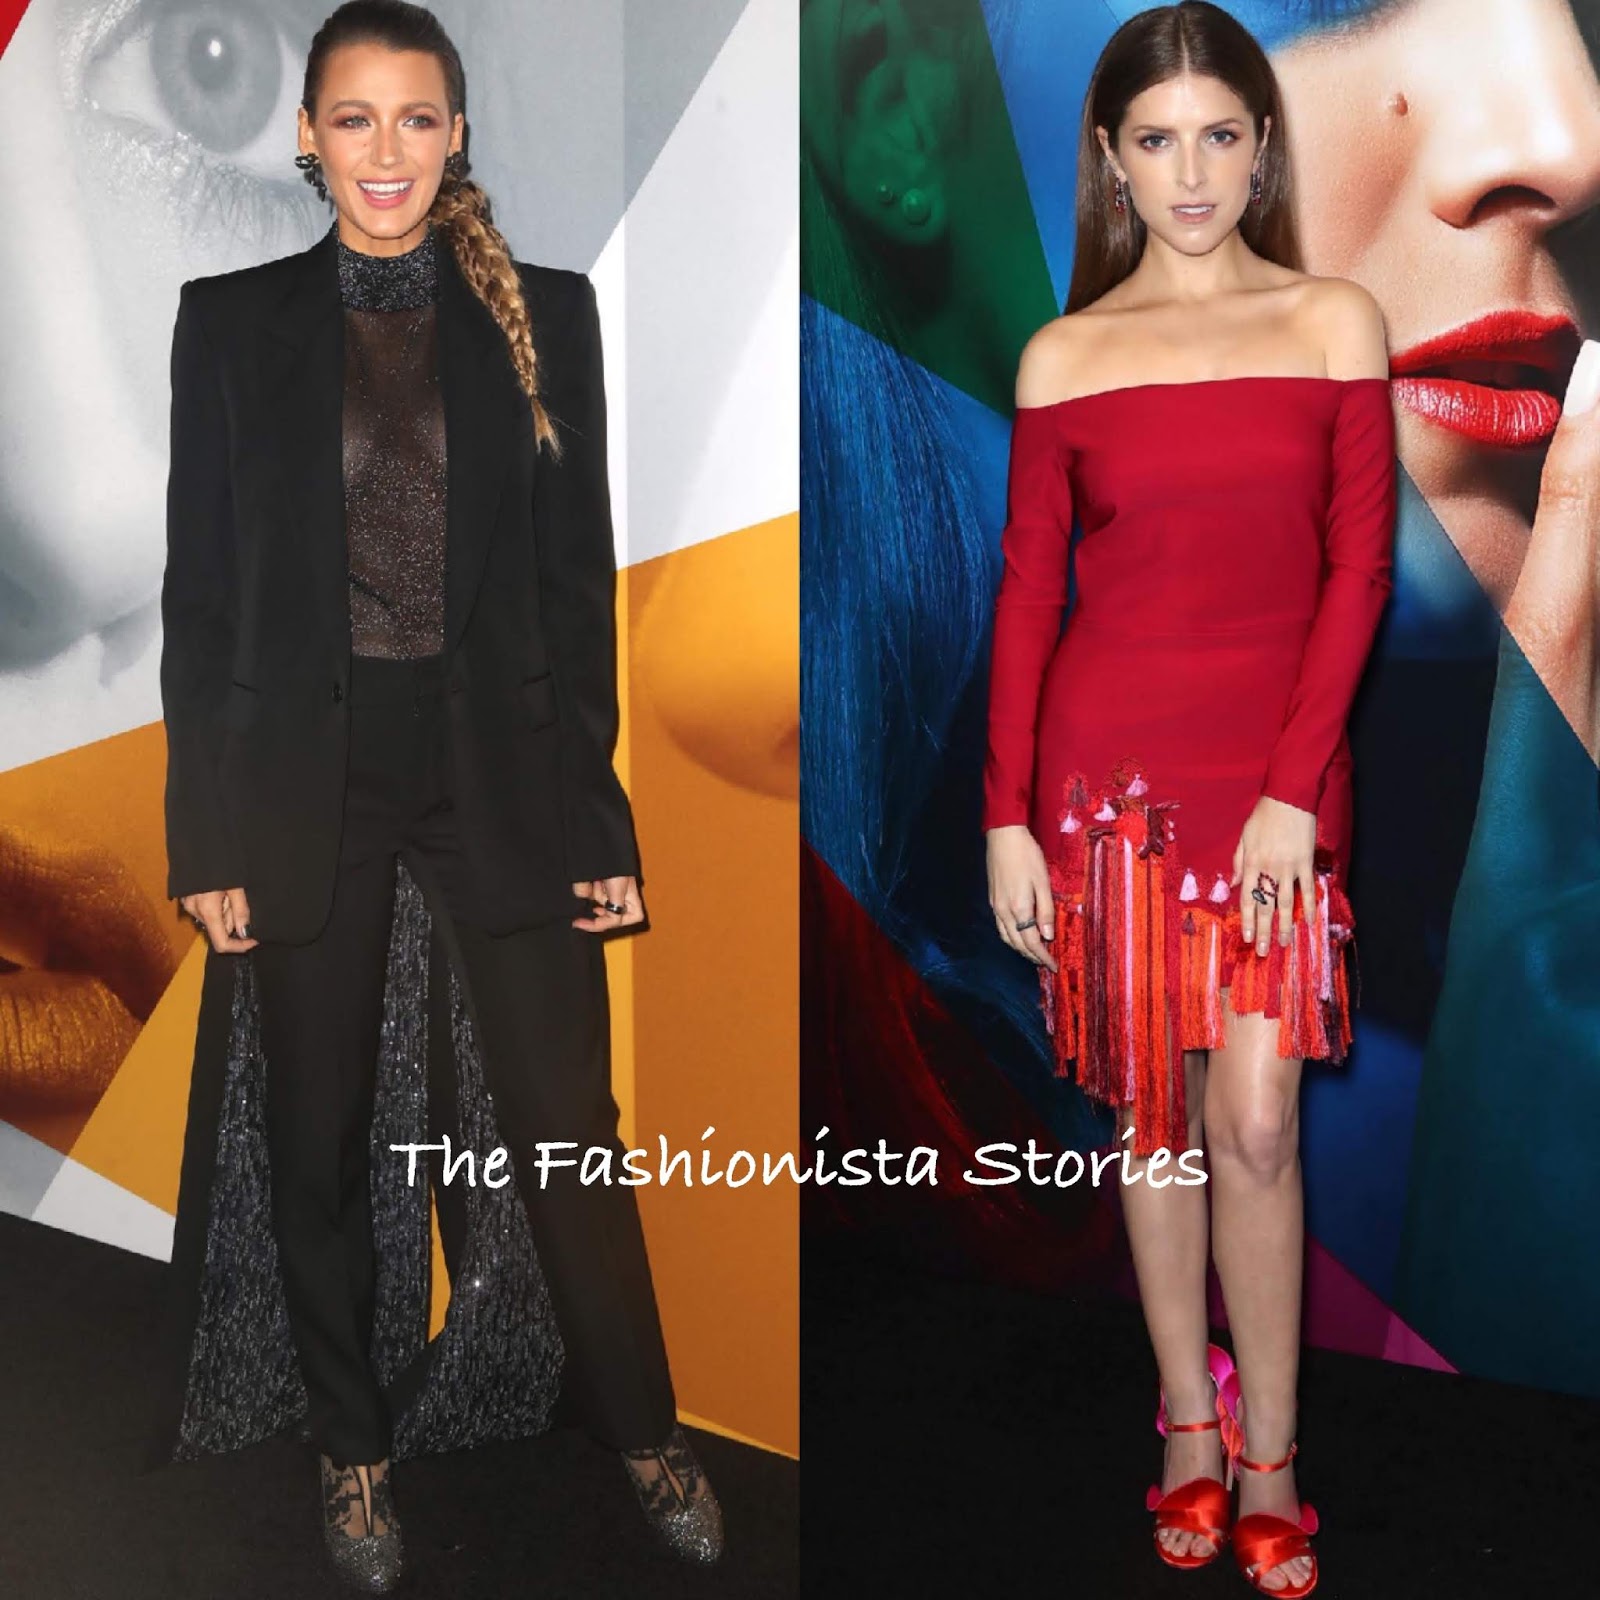 Blake Lively & Anna Kendrick at the 'A Simple Favor' NY Screening